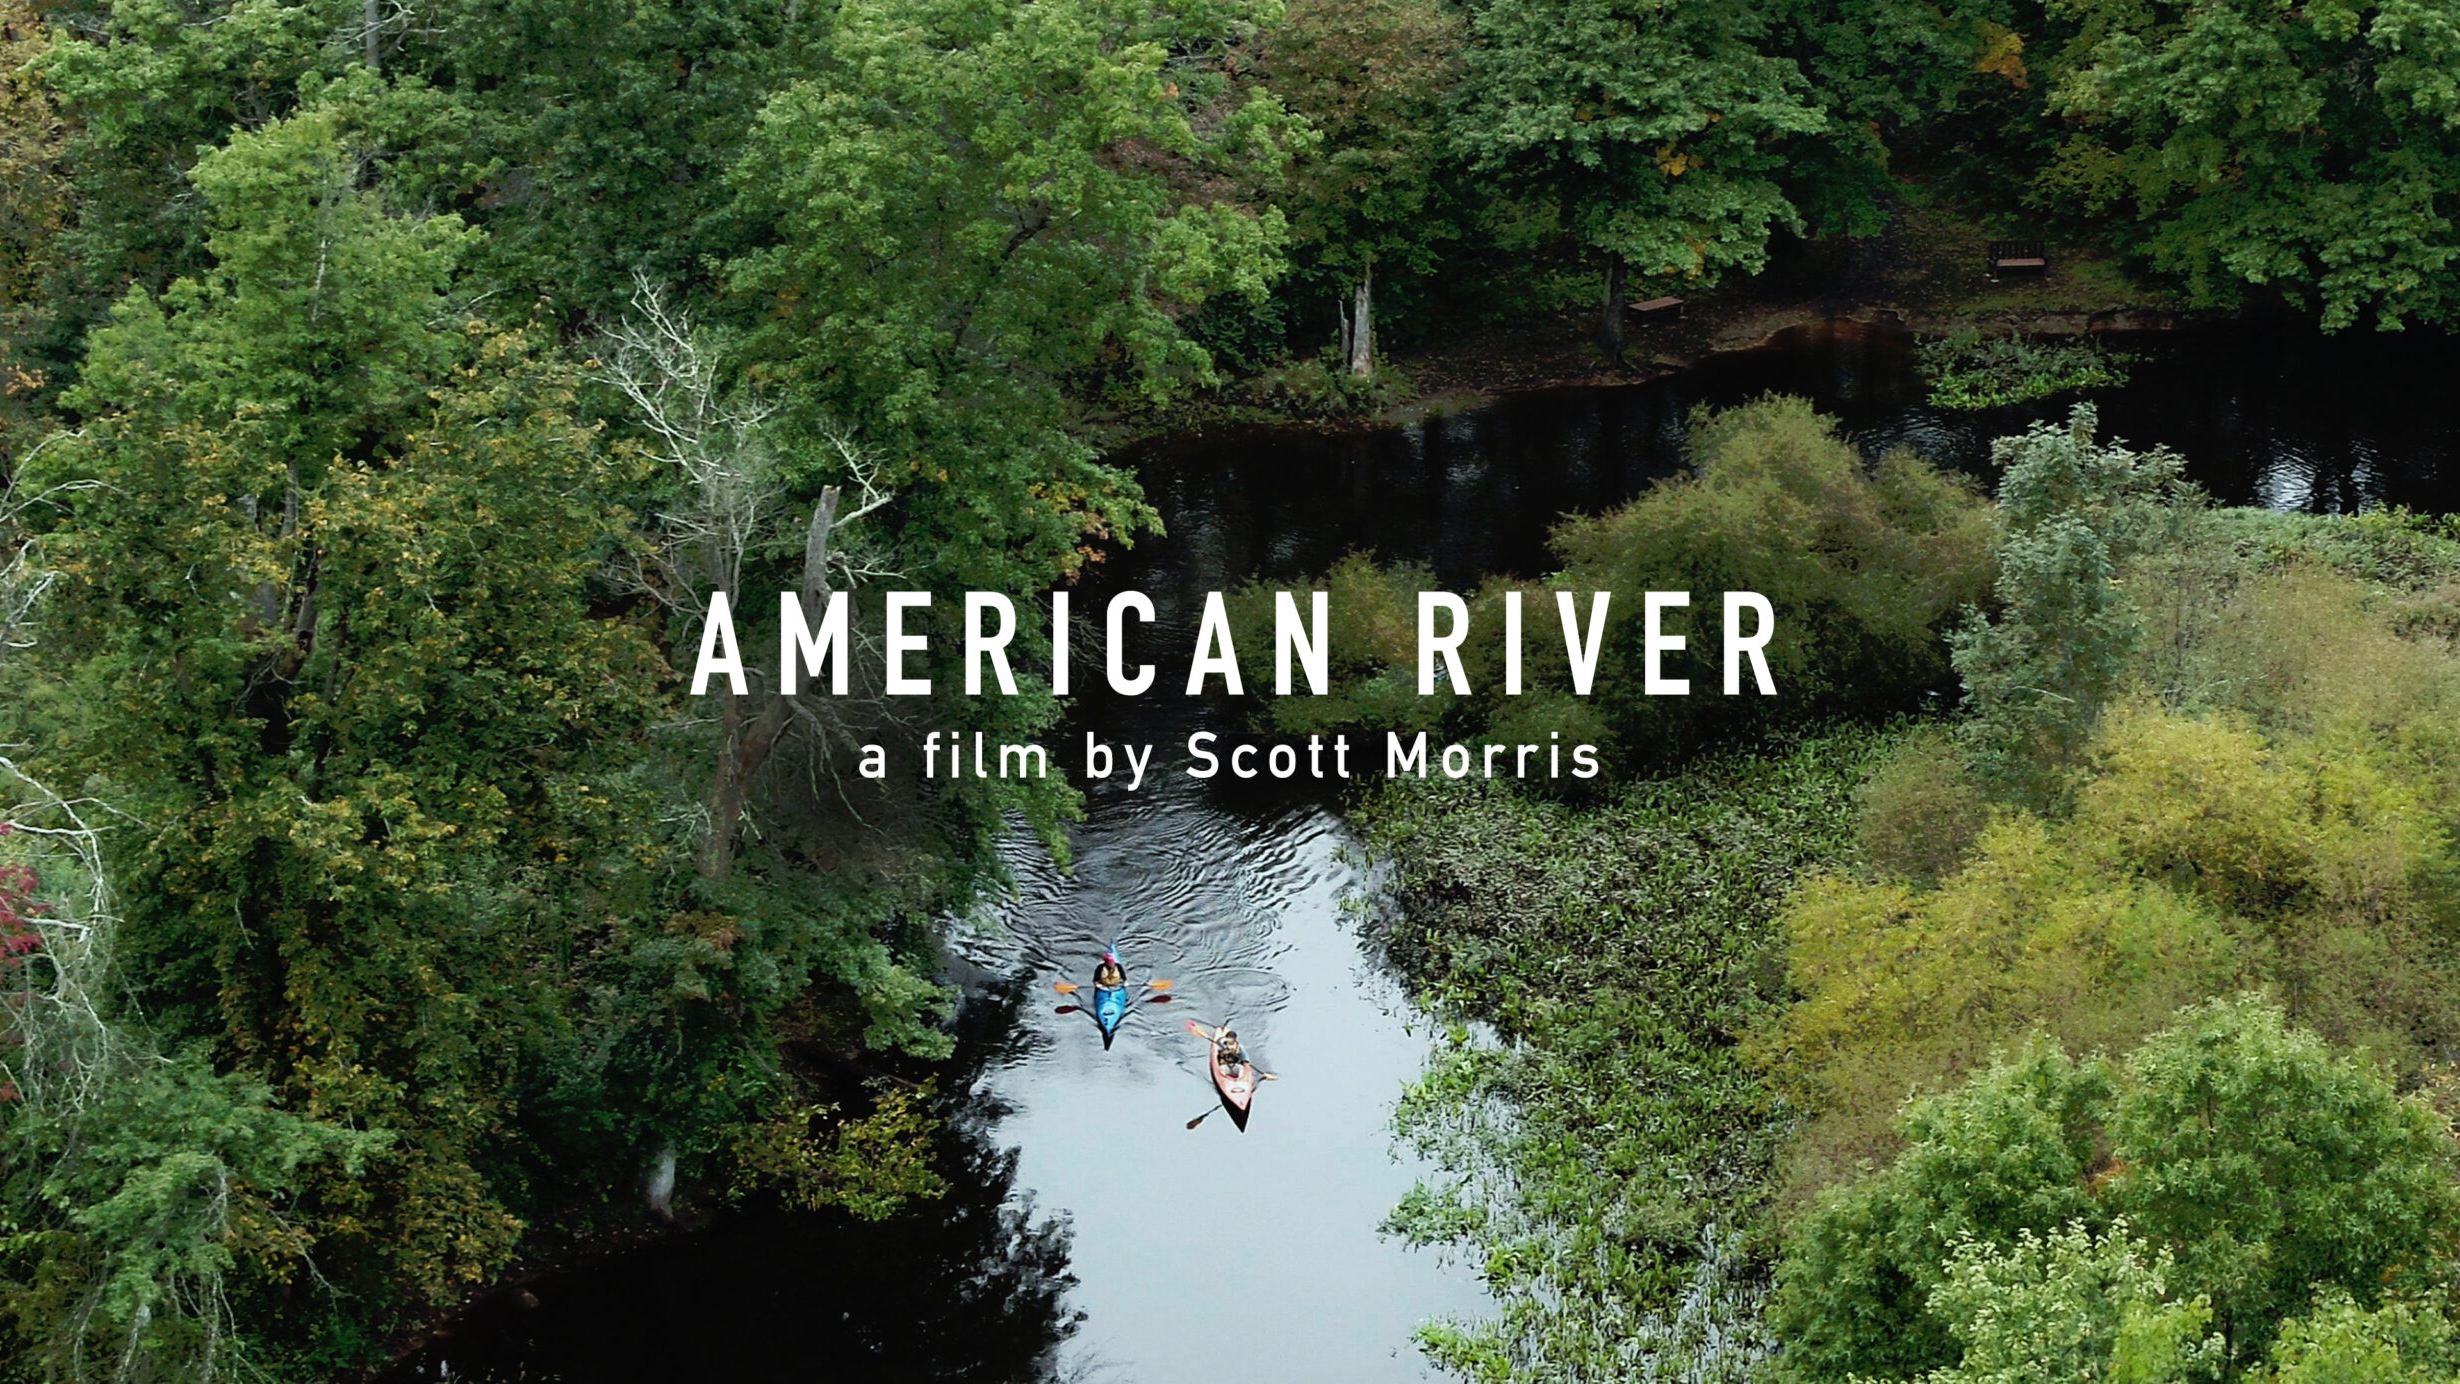 Check out American River airing on a public television station near you!